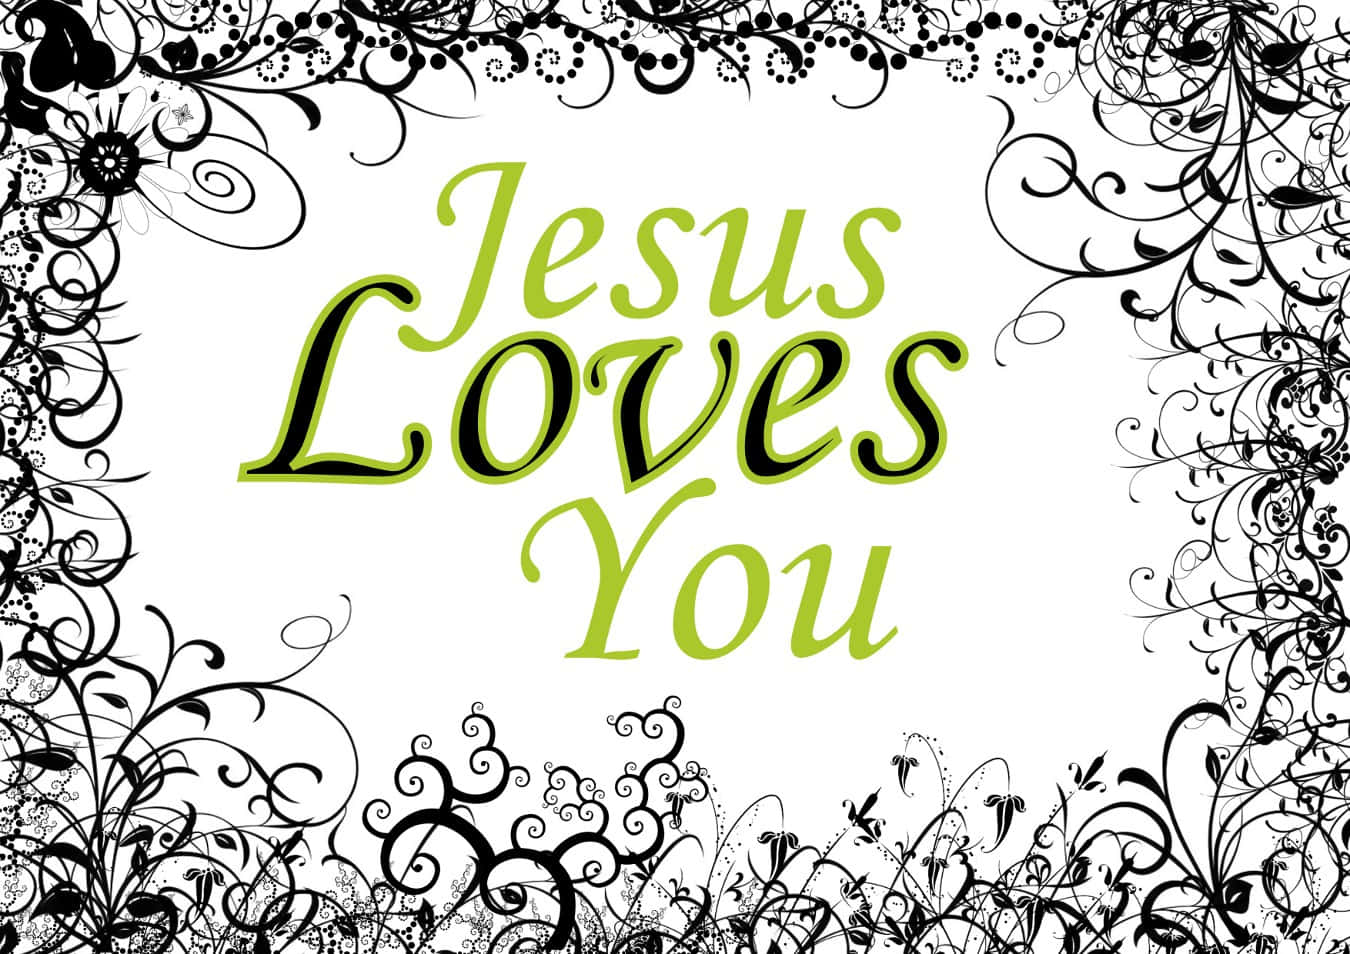 Spread the love of Jesus with everyone. Wallpaper